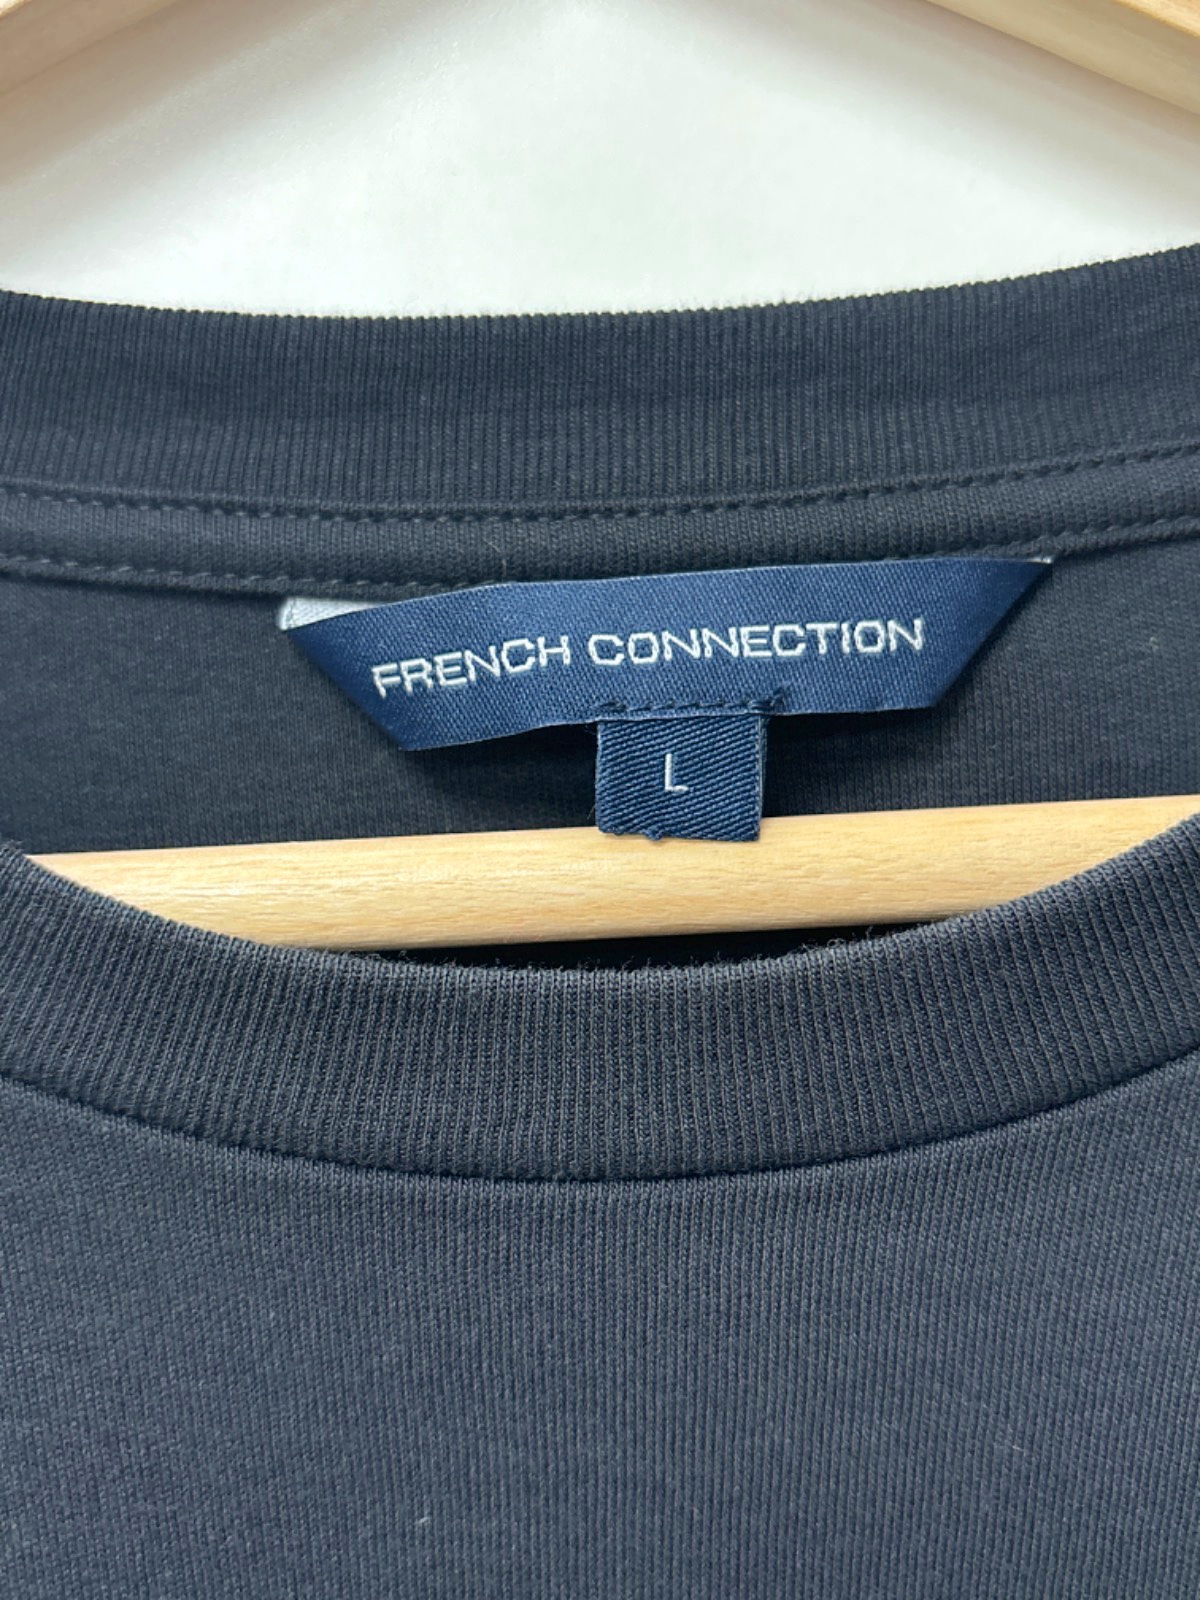 French Connection Black Long Sleeve Slogan Top L